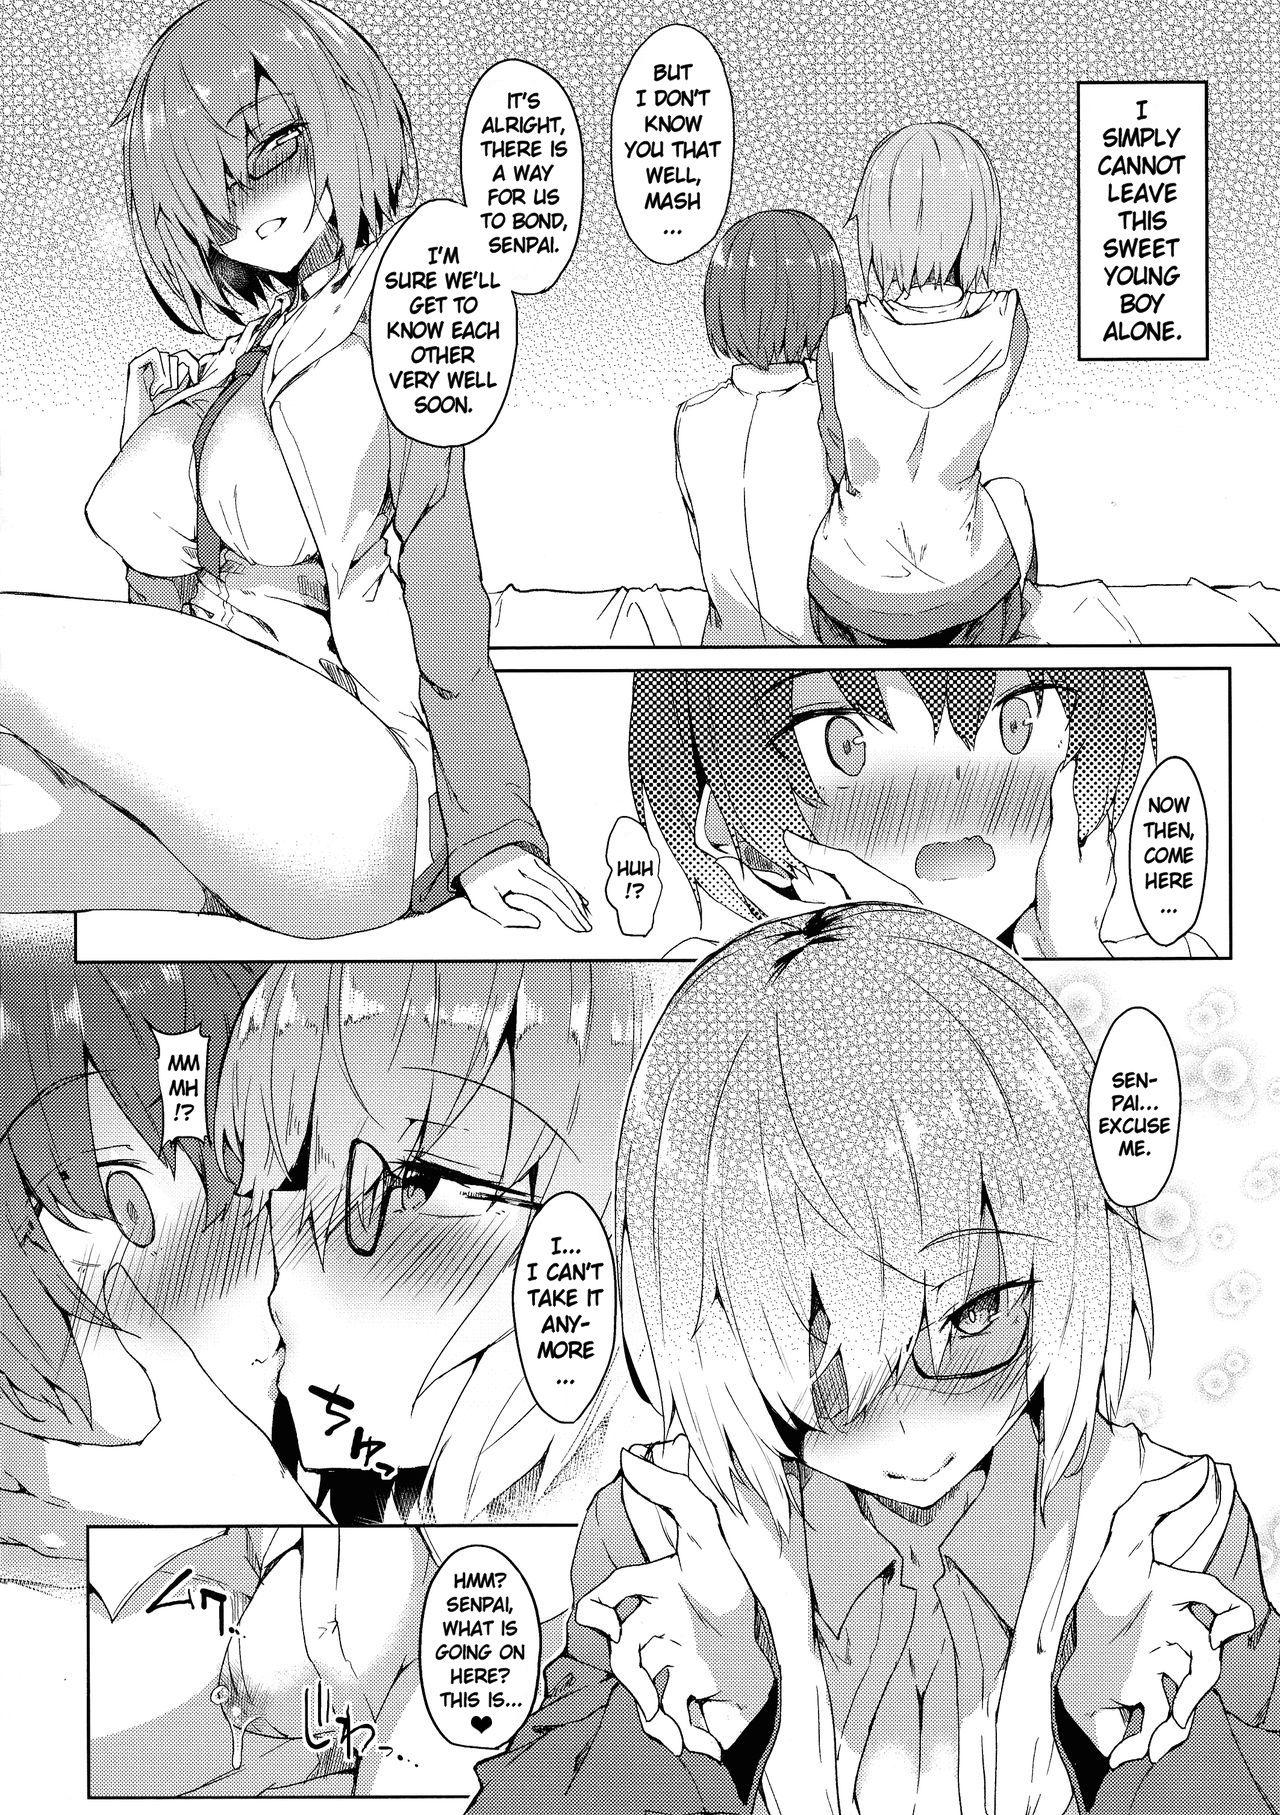 Pure 18 Mash Onee-chan to Shota Master - Fate grand order Oral Sex Porn - Page 6